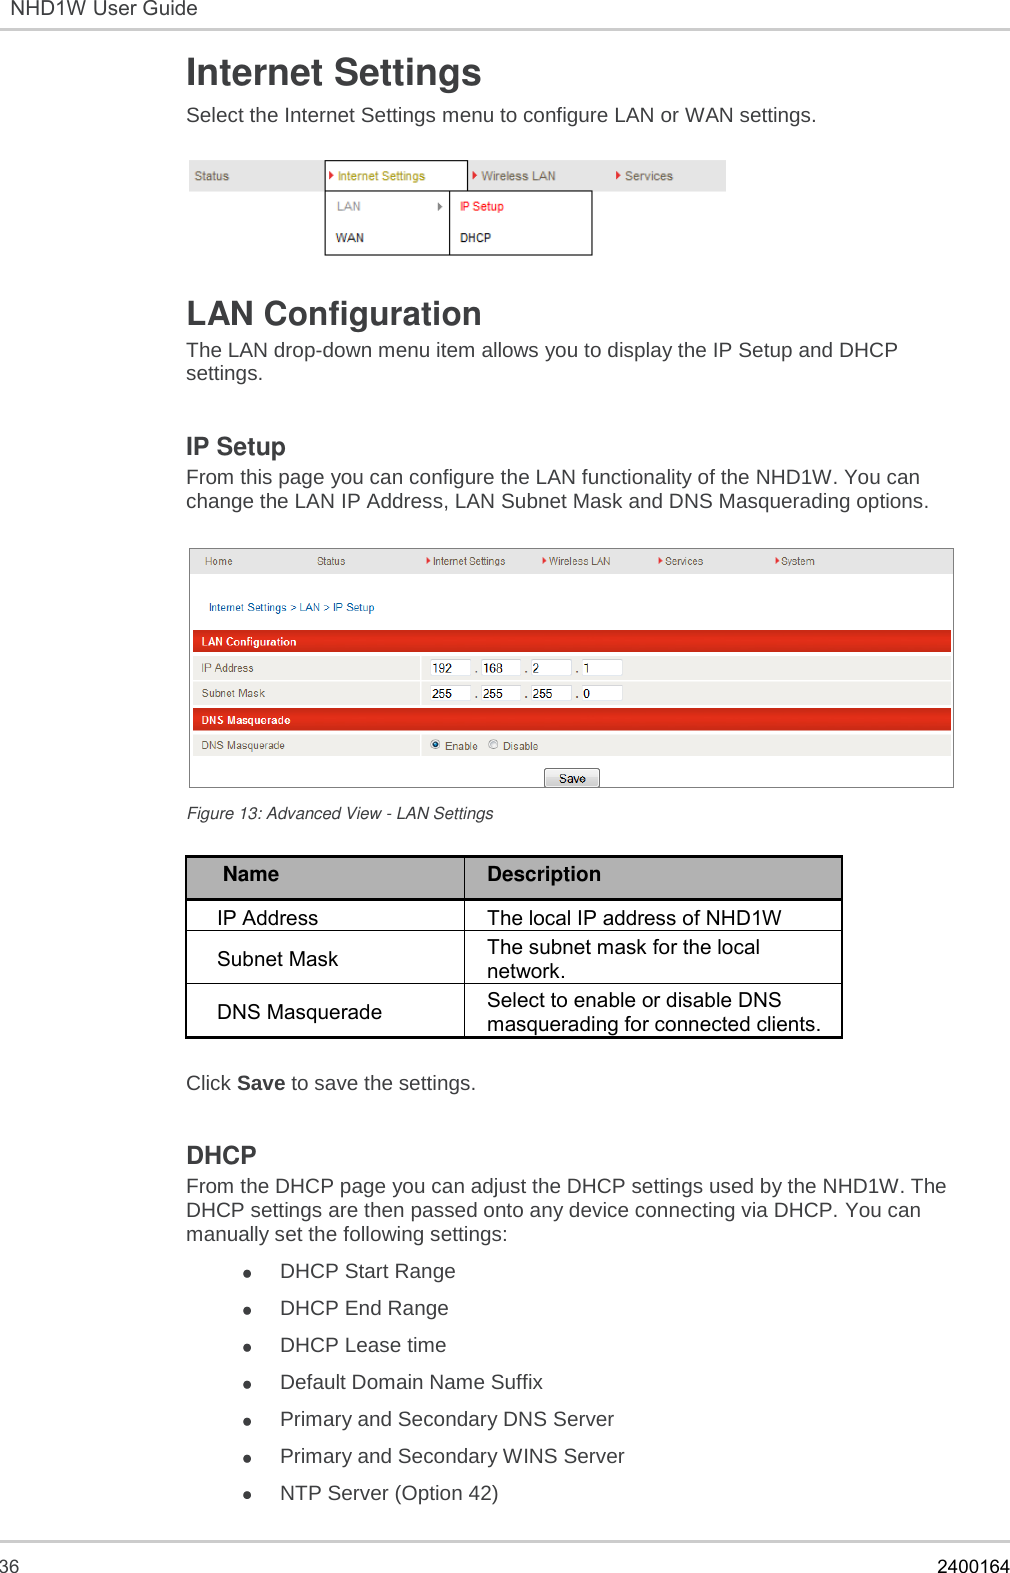  36    2400164  NHD1W User Guide  Internet Settings  Select the Internet Settings menu to configure LAN or WAN settings.    LAN Configuration The LAN drop-down menu item allows you to display the IP Setup and DHCP settings.  IP Setup  From this page you can configure the LAN functionality of the NHD1W. You can change the LAN IP Address, LAN Subnet Mask and DNS Masquerading options.    Figure 13: Advanced View - LAN Settings   Name Description IP Address  The local IP address of NHD1W  Subnet Mask  The subnet mask for the local network.  DNS Masquerade Select to enable or disable DNS masquerading for connected clients.  Click Save to save the settings.  DHCP From the DHCP page you can adjust the DHCP settings used by the NHD1W. The DHCP settings are then passed onto any device connecting via DHCP. You can manually set the following settings:  DHCP Start Range  DHCP End Range  DHCP Lease time   Default Domain Name Suffix   Primary and Secondary DNS Server   Primary and Secondary WINS Server   NTP Server (Option 42)  